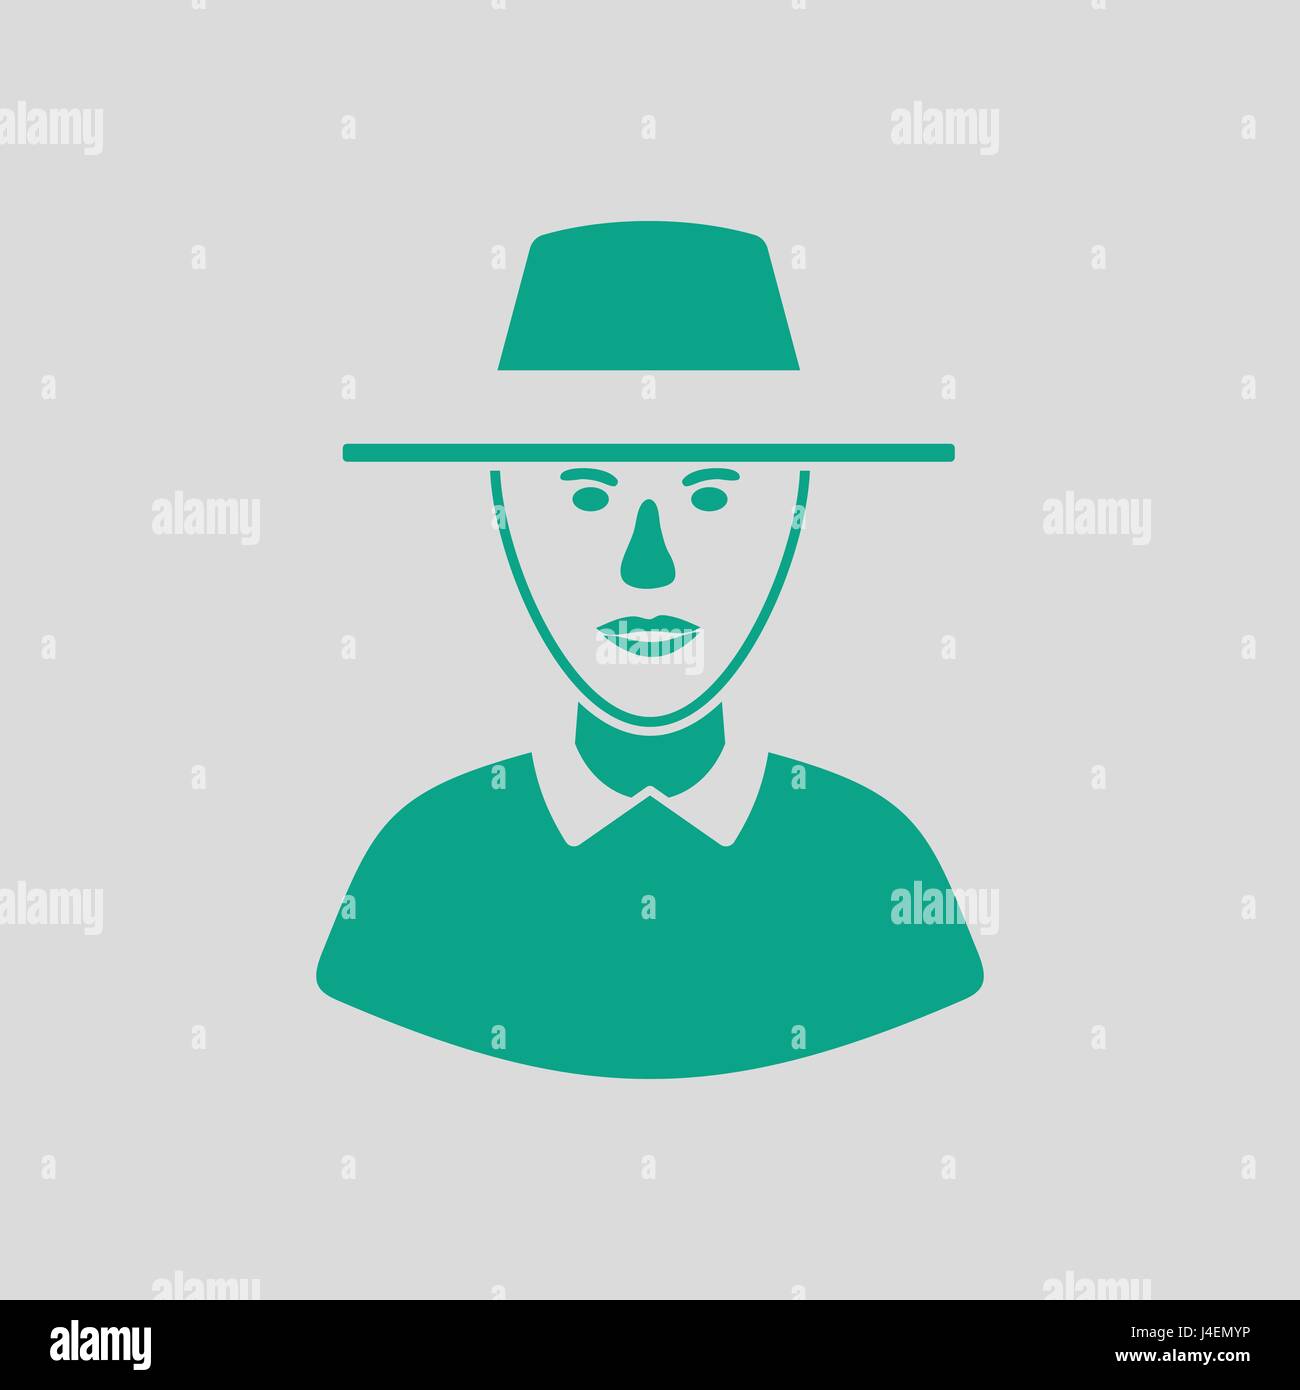 Cricket umpire icon. Gray background with green. Vector illustration. Stock Vector